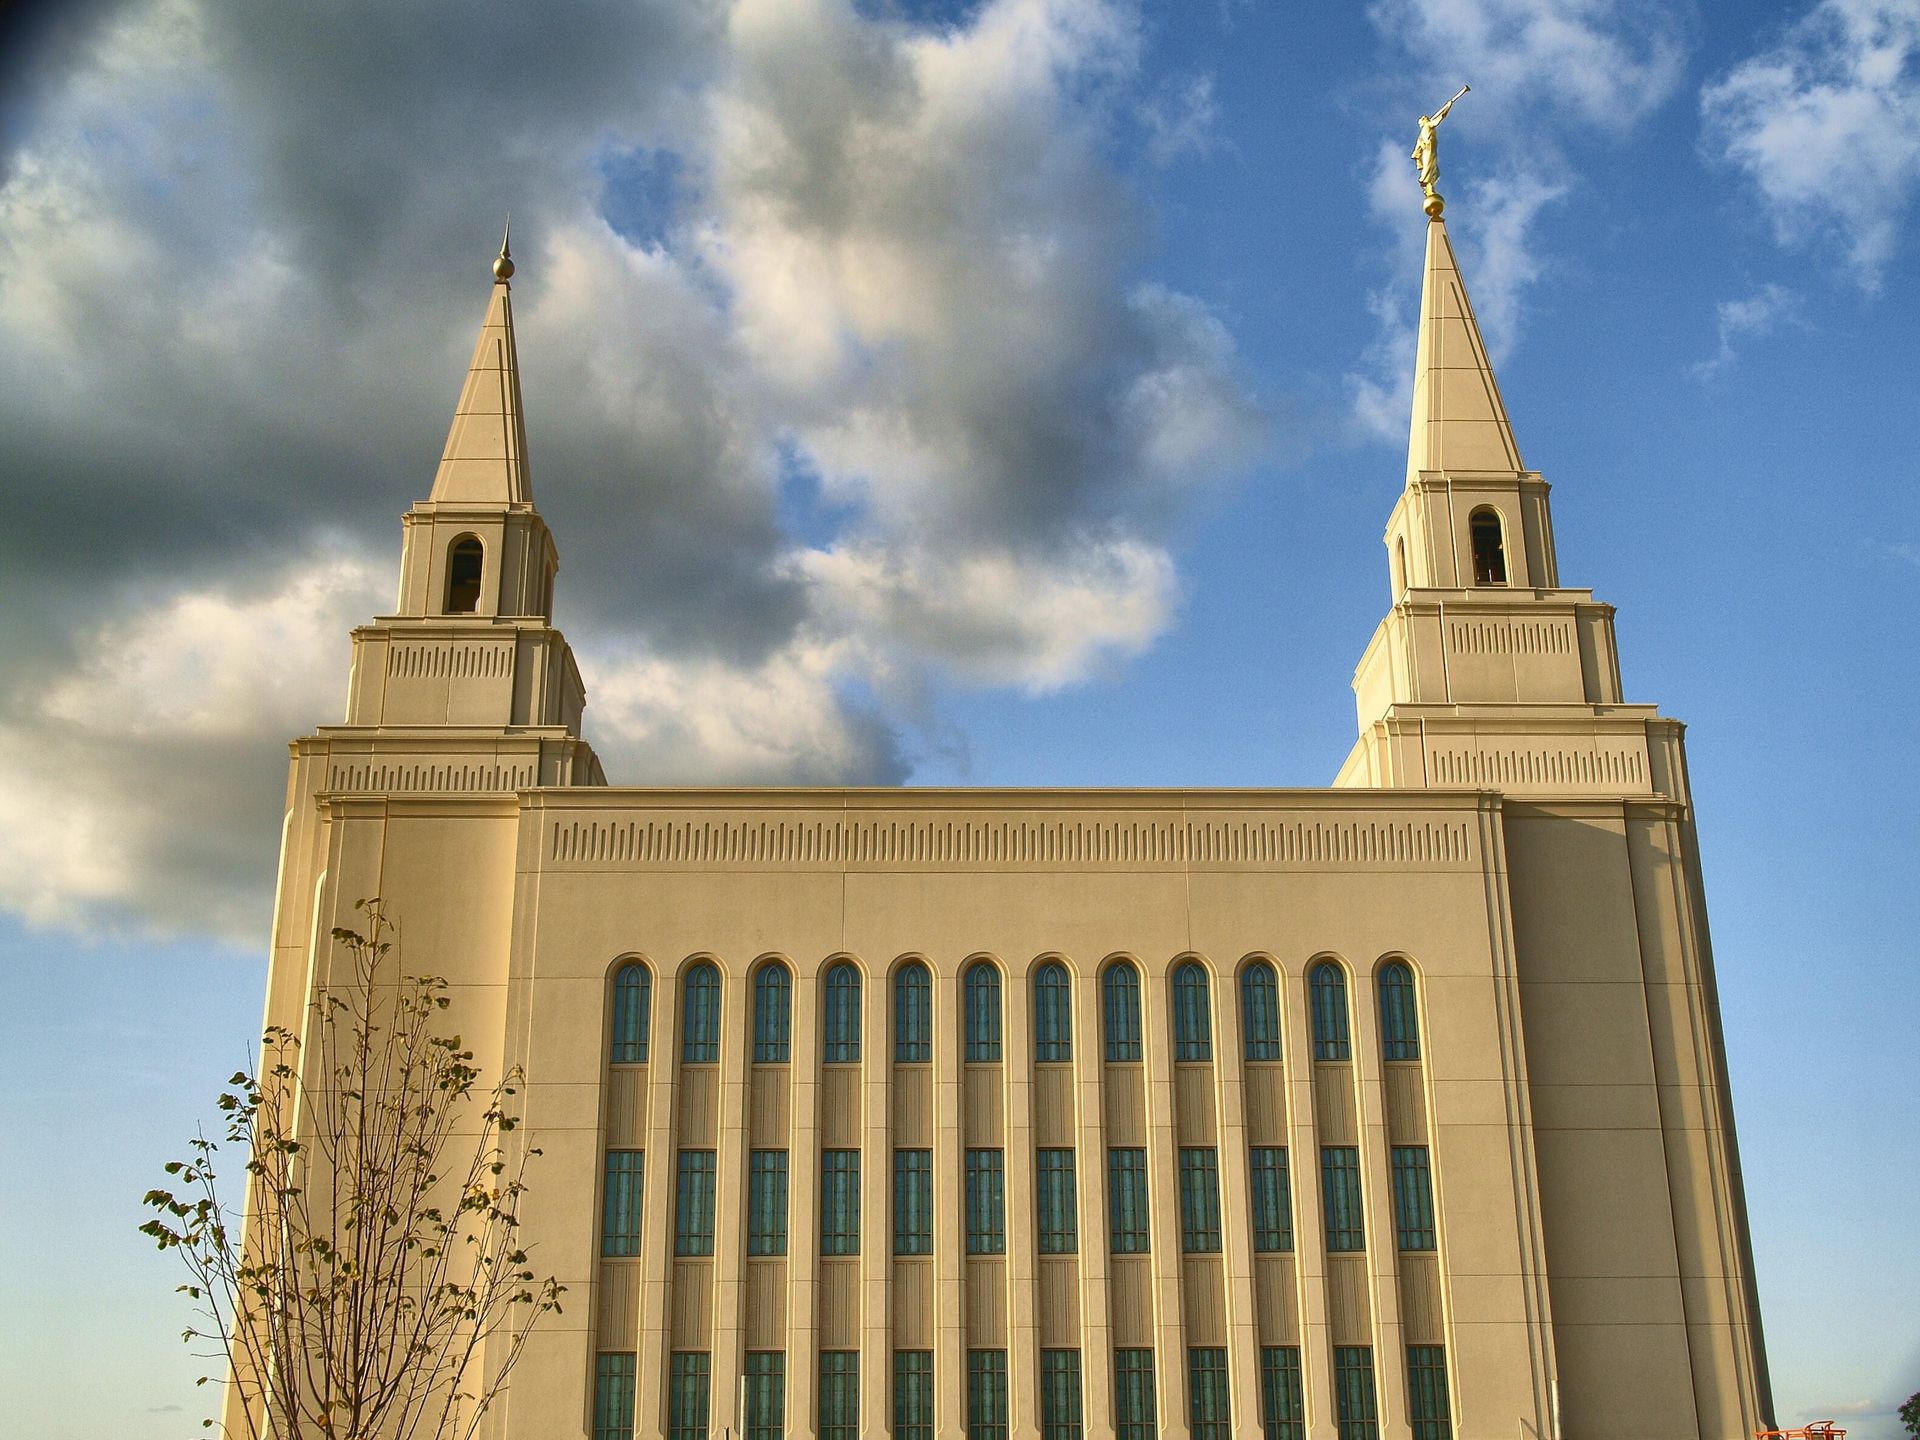 A view of the Kansas City Missouri Temple from the side.